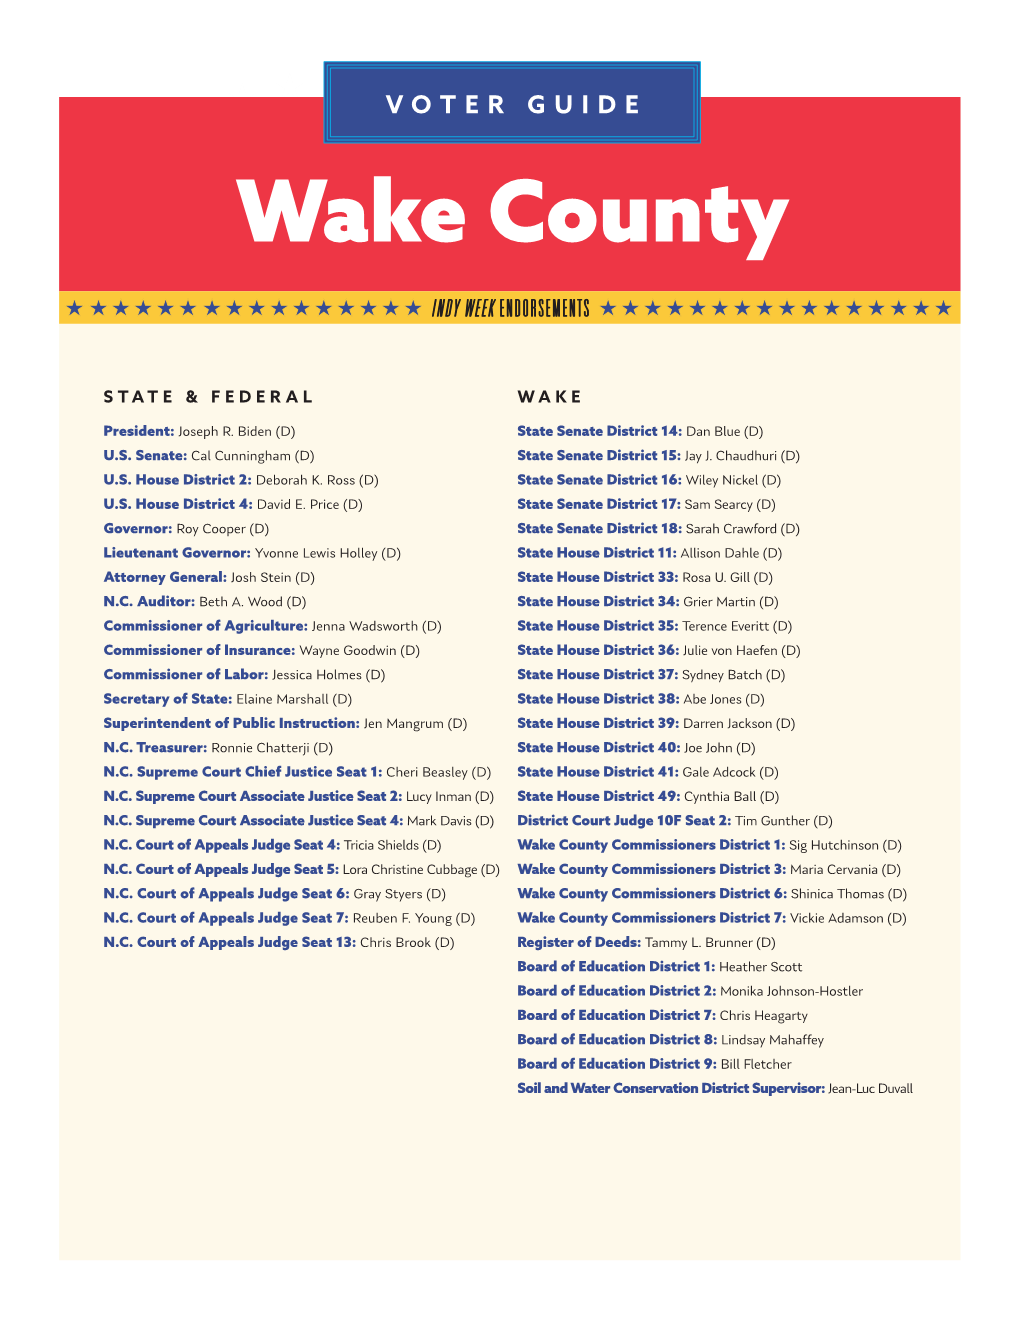 To Download the Pdf Version of Wake County Voting Guide